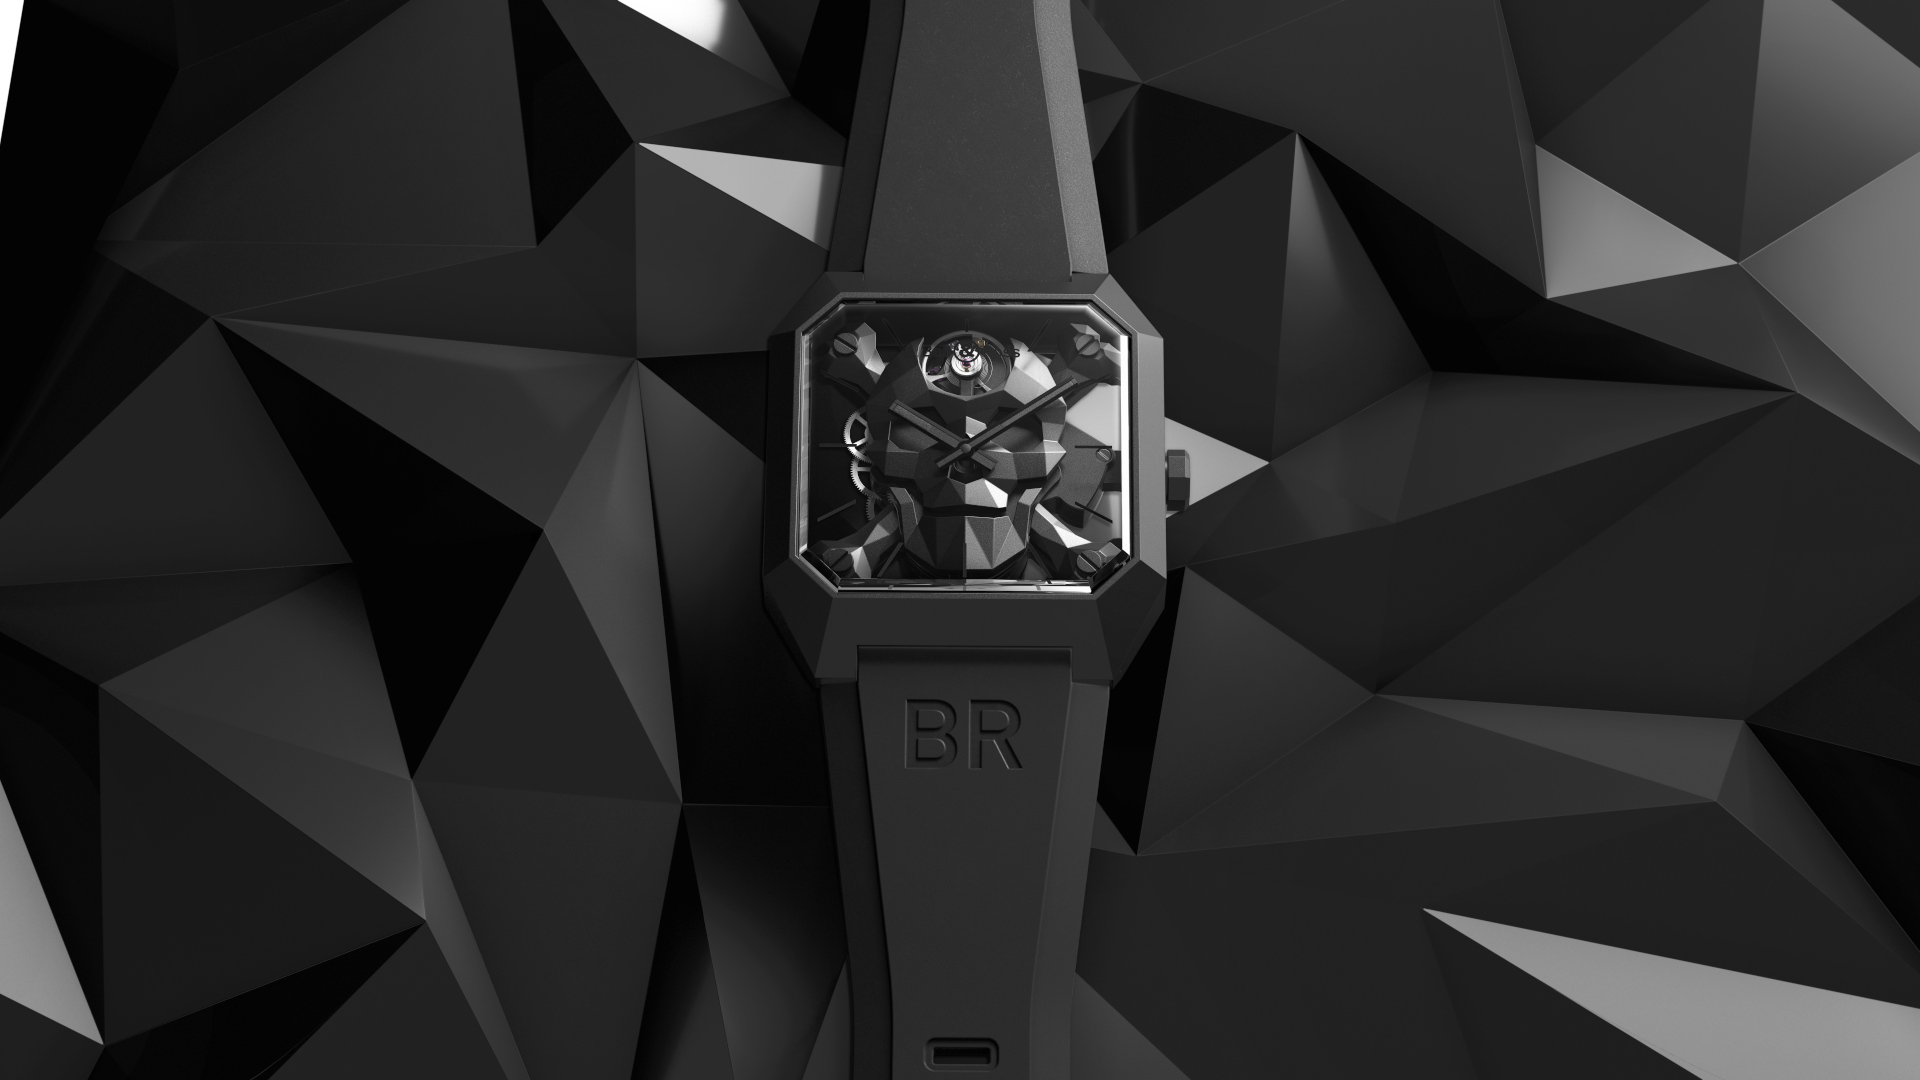 The BR 01 Cyber Skull brings a Bell & Ross tradition into the new age